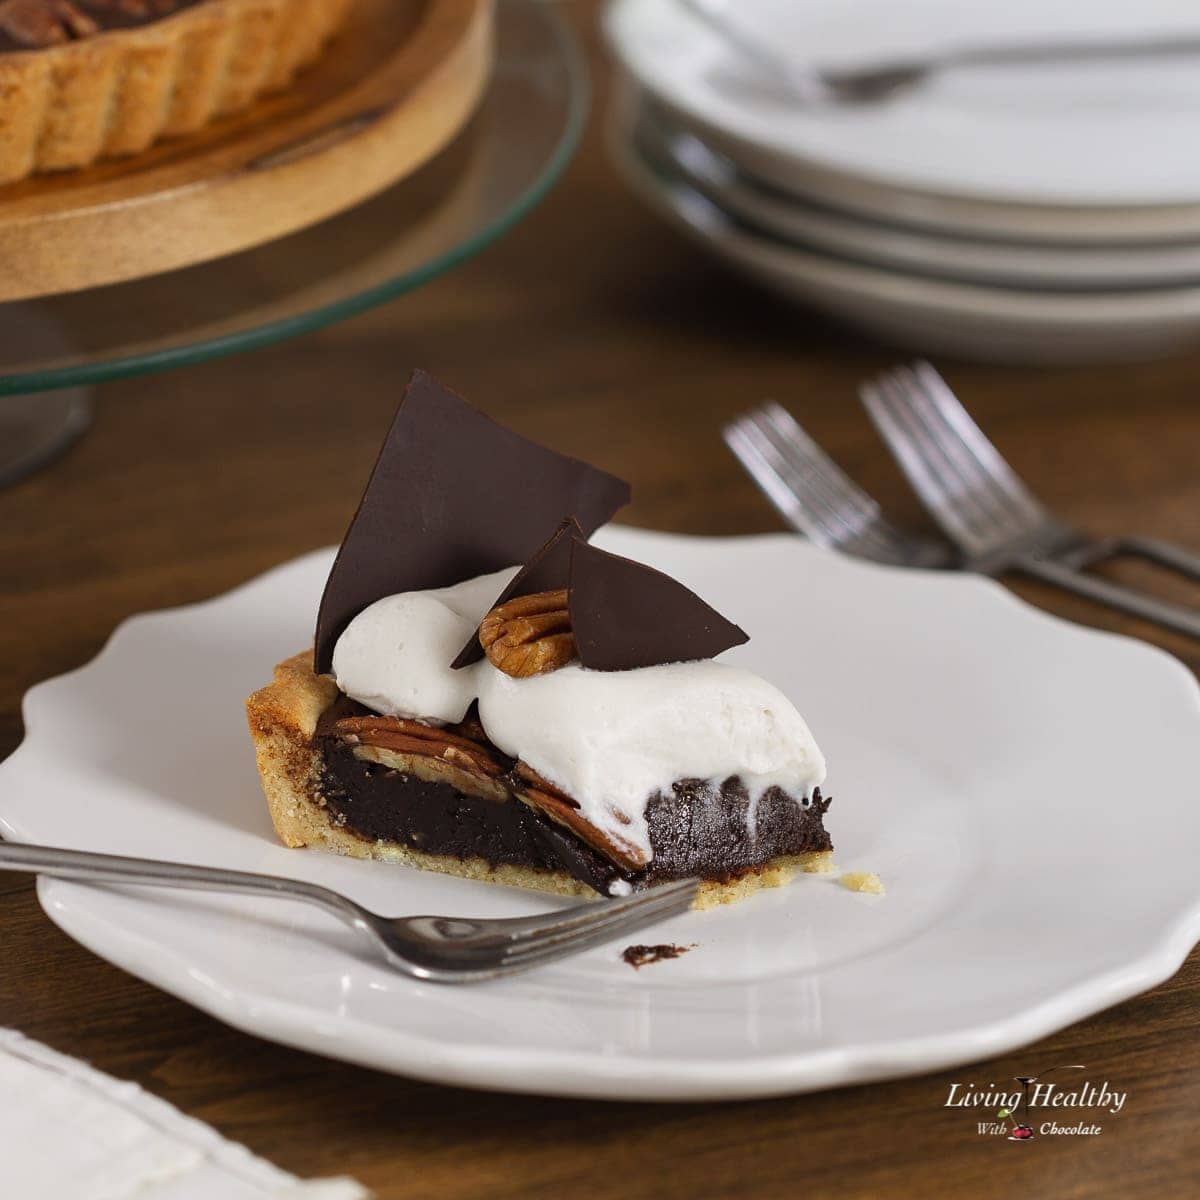 A slice of Chocolate Pecan Pie on a serving plate topped with Whipping cream and chocolate triangles